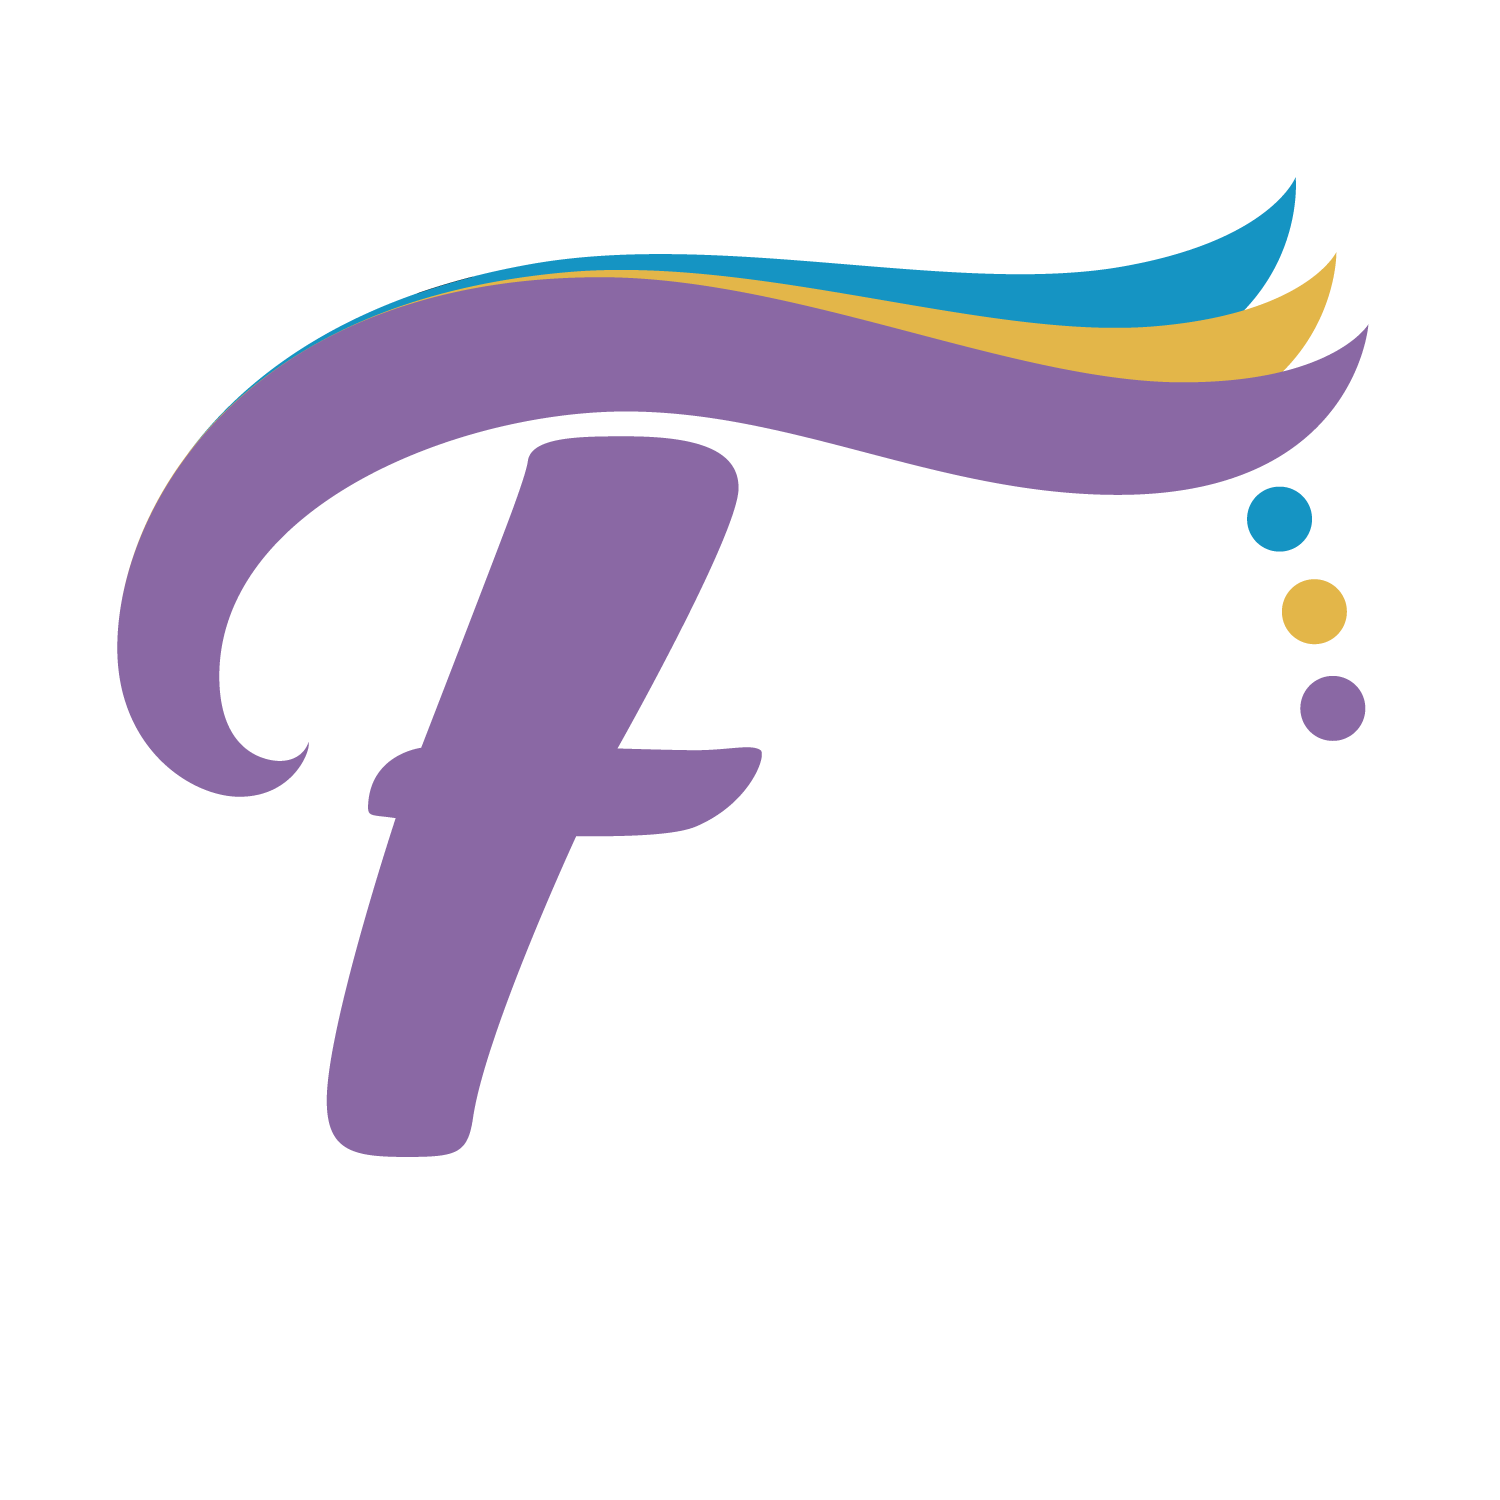 Fwee Photography